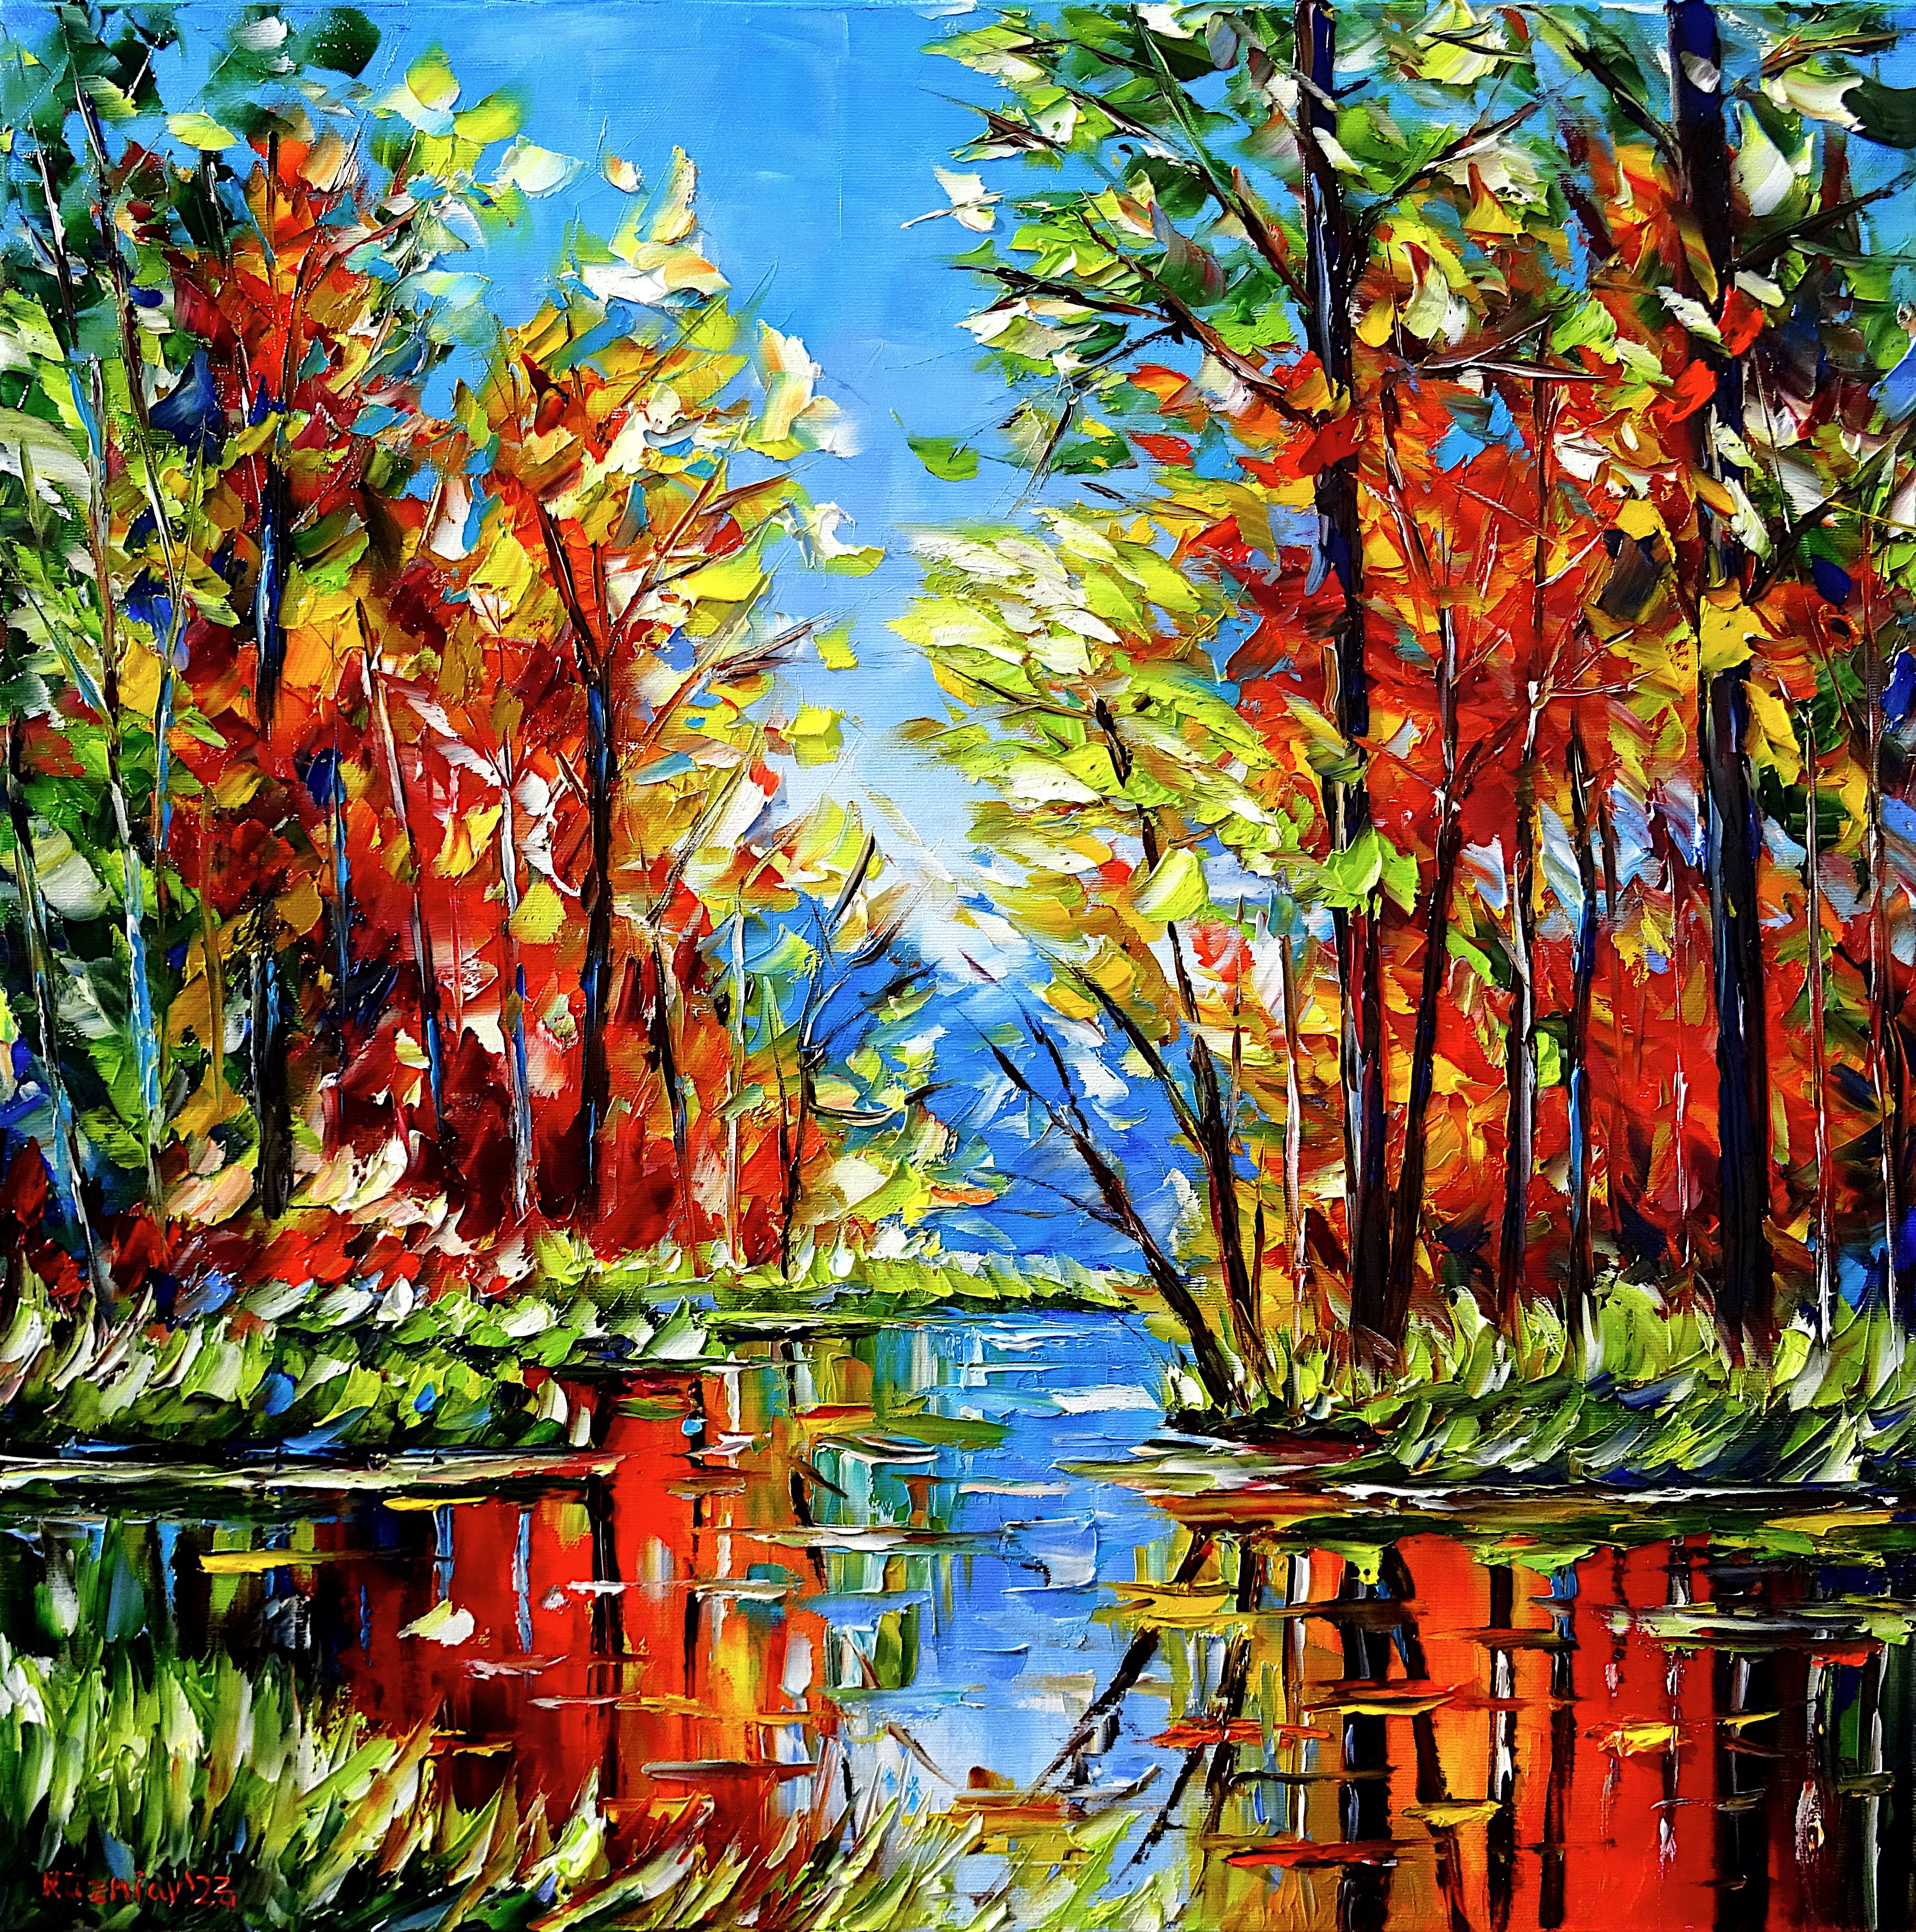 Autumn landscape,autumn forest,autumn trees,pond in autumn,pond picture,pond painting,colorful autumn,red autumn,autumn impression,autumn painting,autumn art,autumn picture,autumn abstract,red and green colors,lively autumn,autumn colors,forest pond,pond in the forest,autumn beauty,autumn leaves,autumn romance,romantic autumn,landscape painting,forest landscape,forest painting,beautiful autumn,autumn love,square format,square picture,palette knife oil painting,modern art,figurative art,figurative painting,contemporary painting,abstract painting,lively colors,colorful painting,bright colors,impasto painting